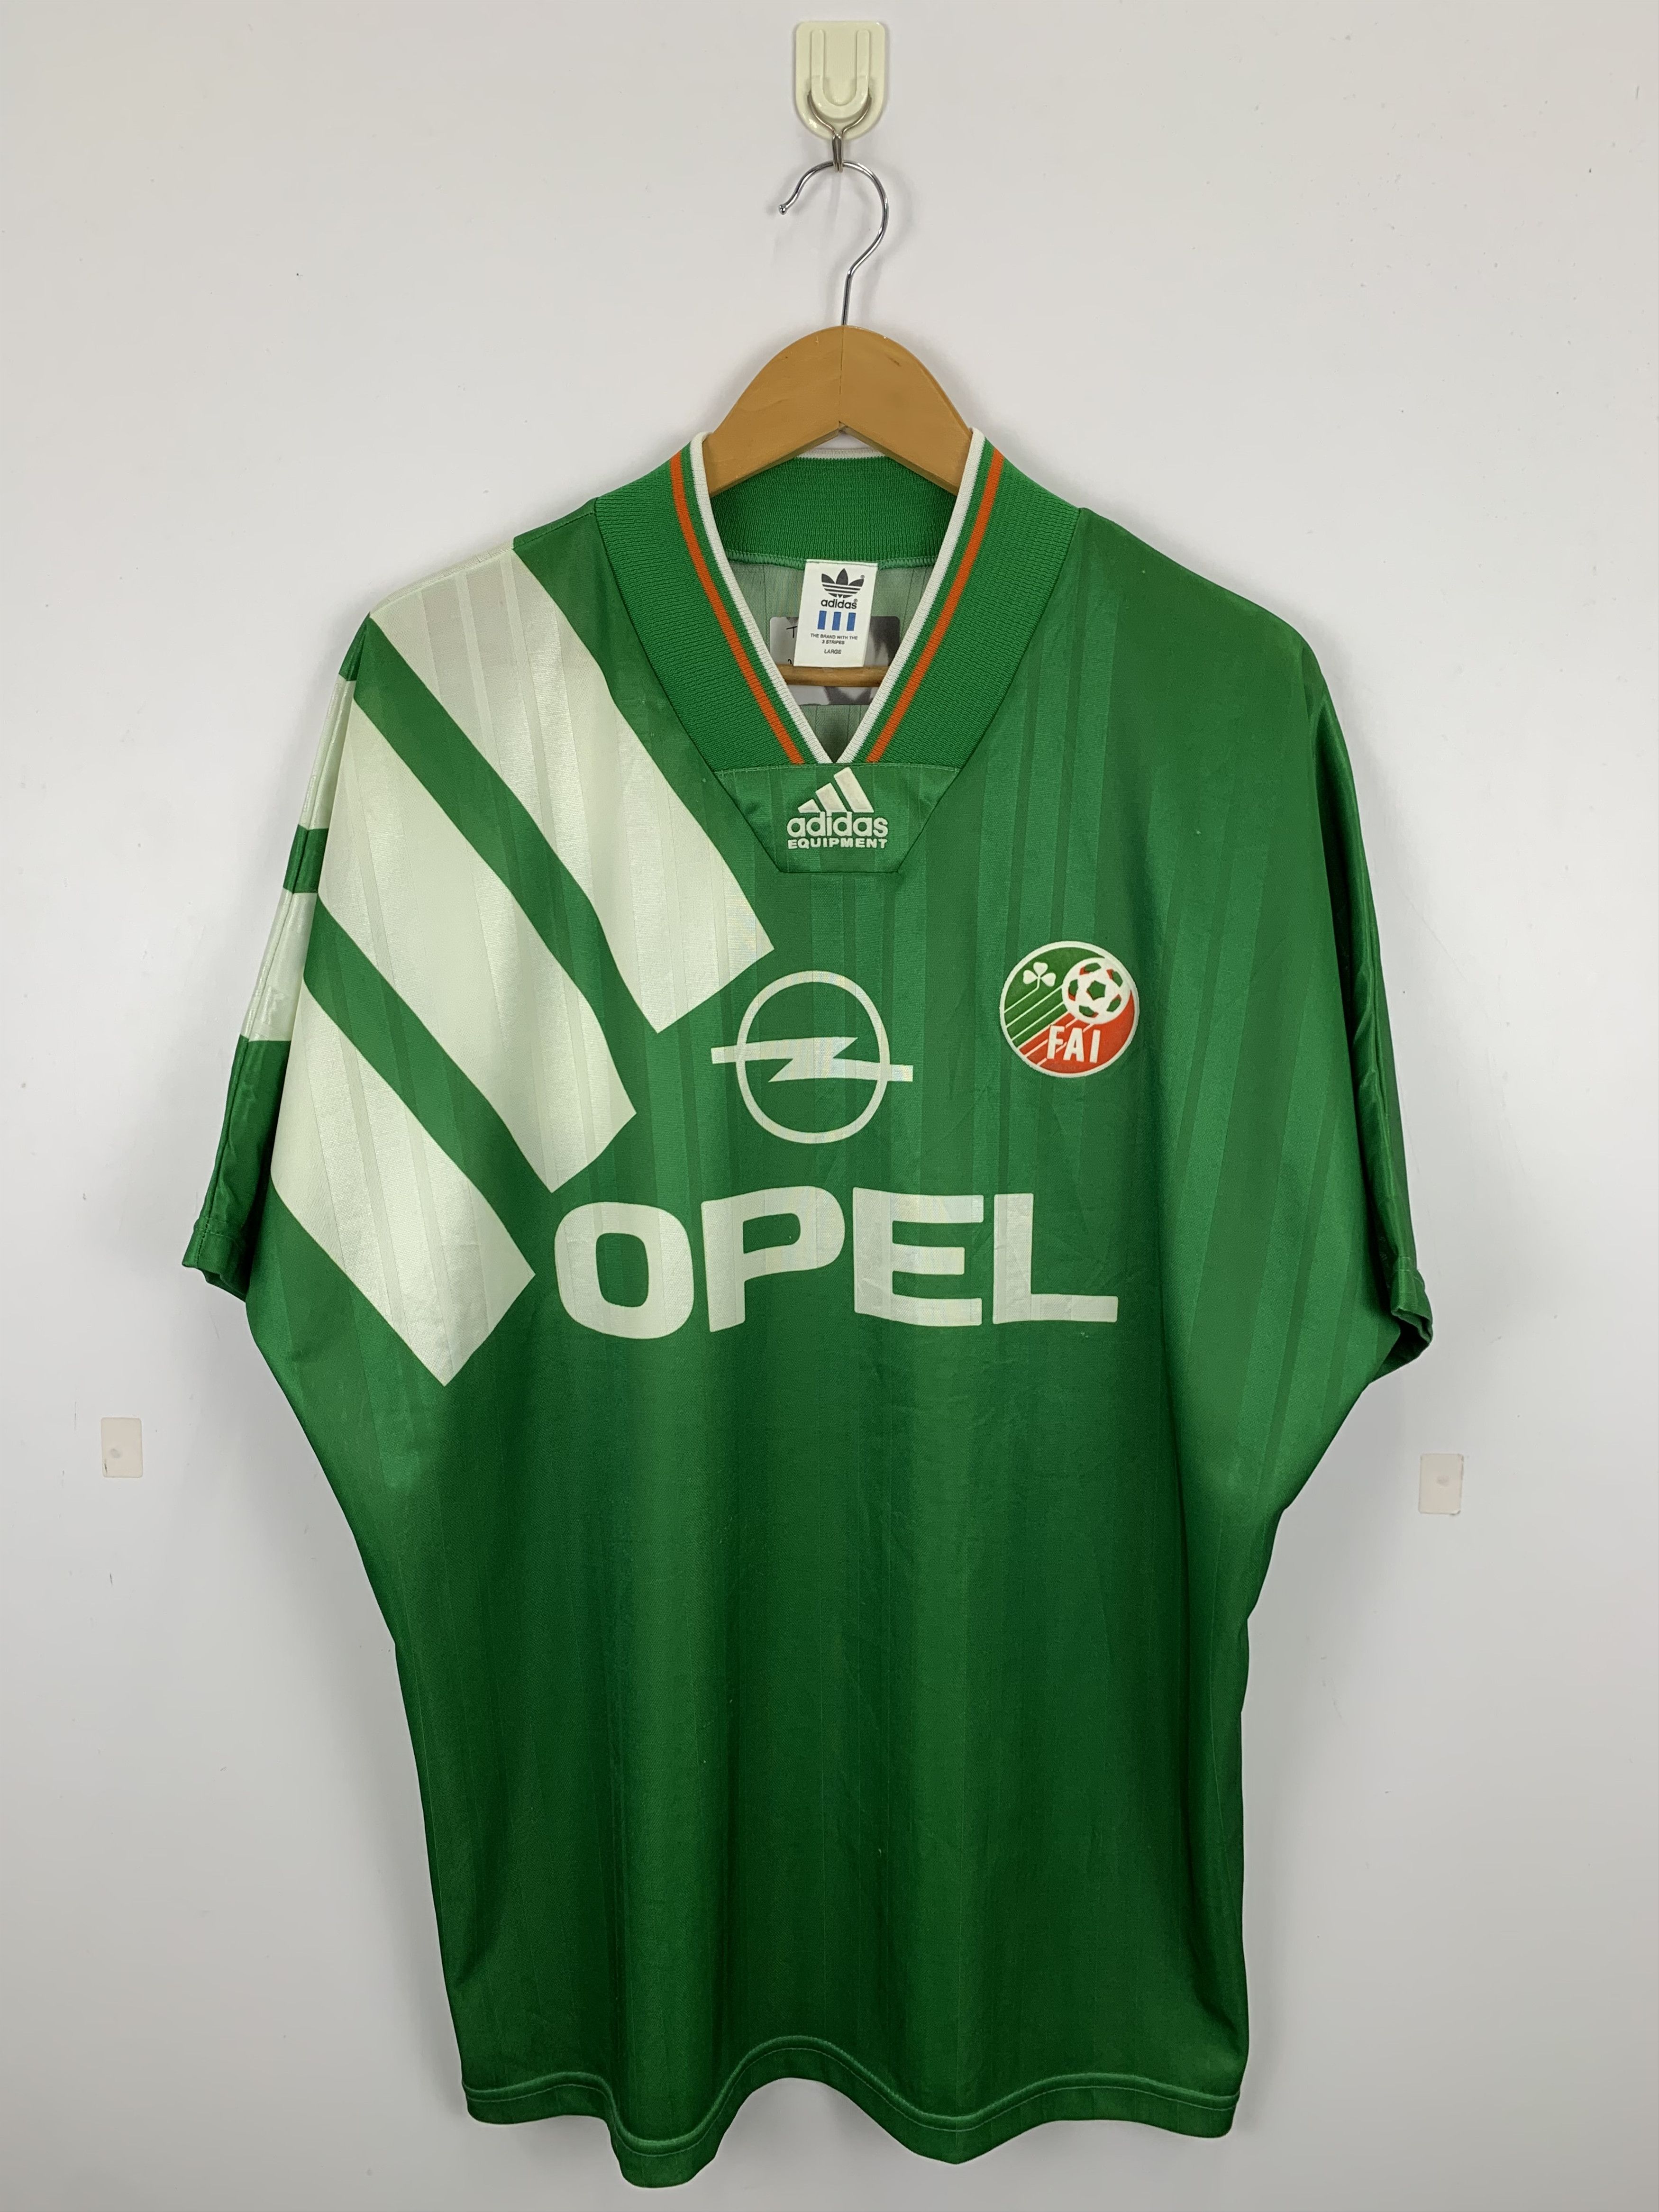 Adidas Vintage 90s Adidas Opel Ireland World Cup Jerseys Size US L / EU 52-54 / 3 - 1 Preview